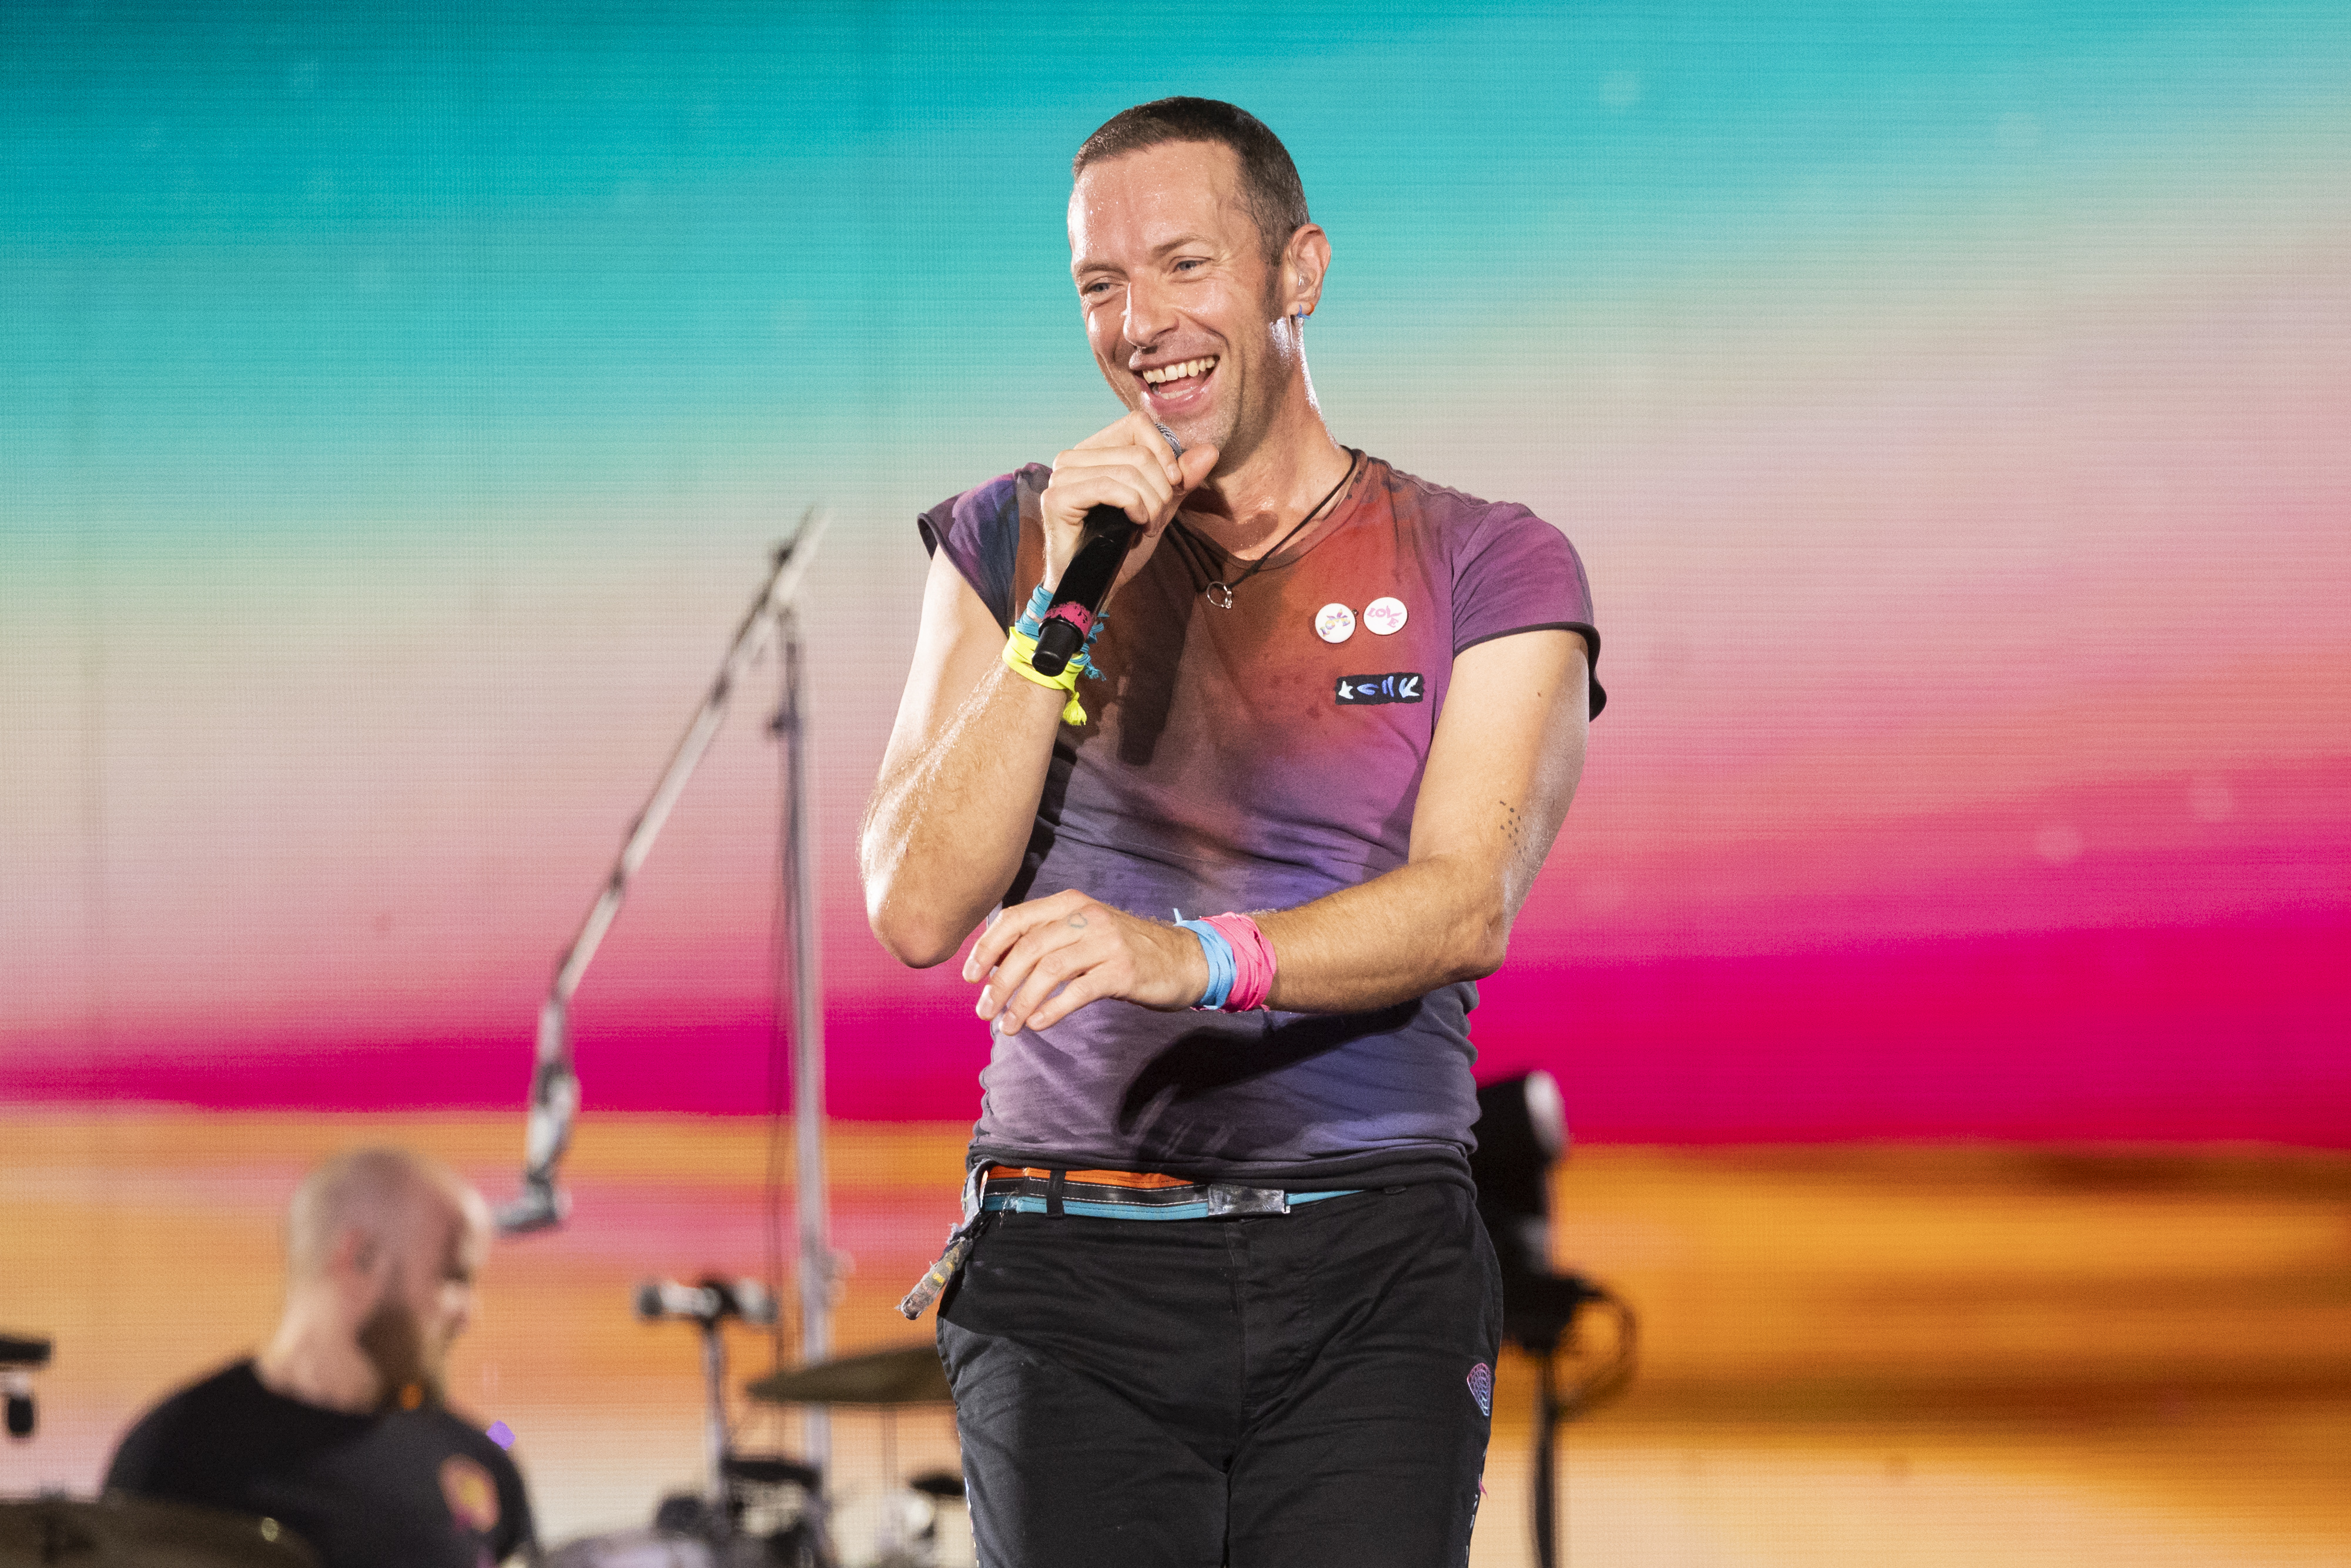 Chris Martin performing during Coldplay's "Music of the Spheres" World Tour in Perth, Australia on November 18, 2023. | Source: Getty Images